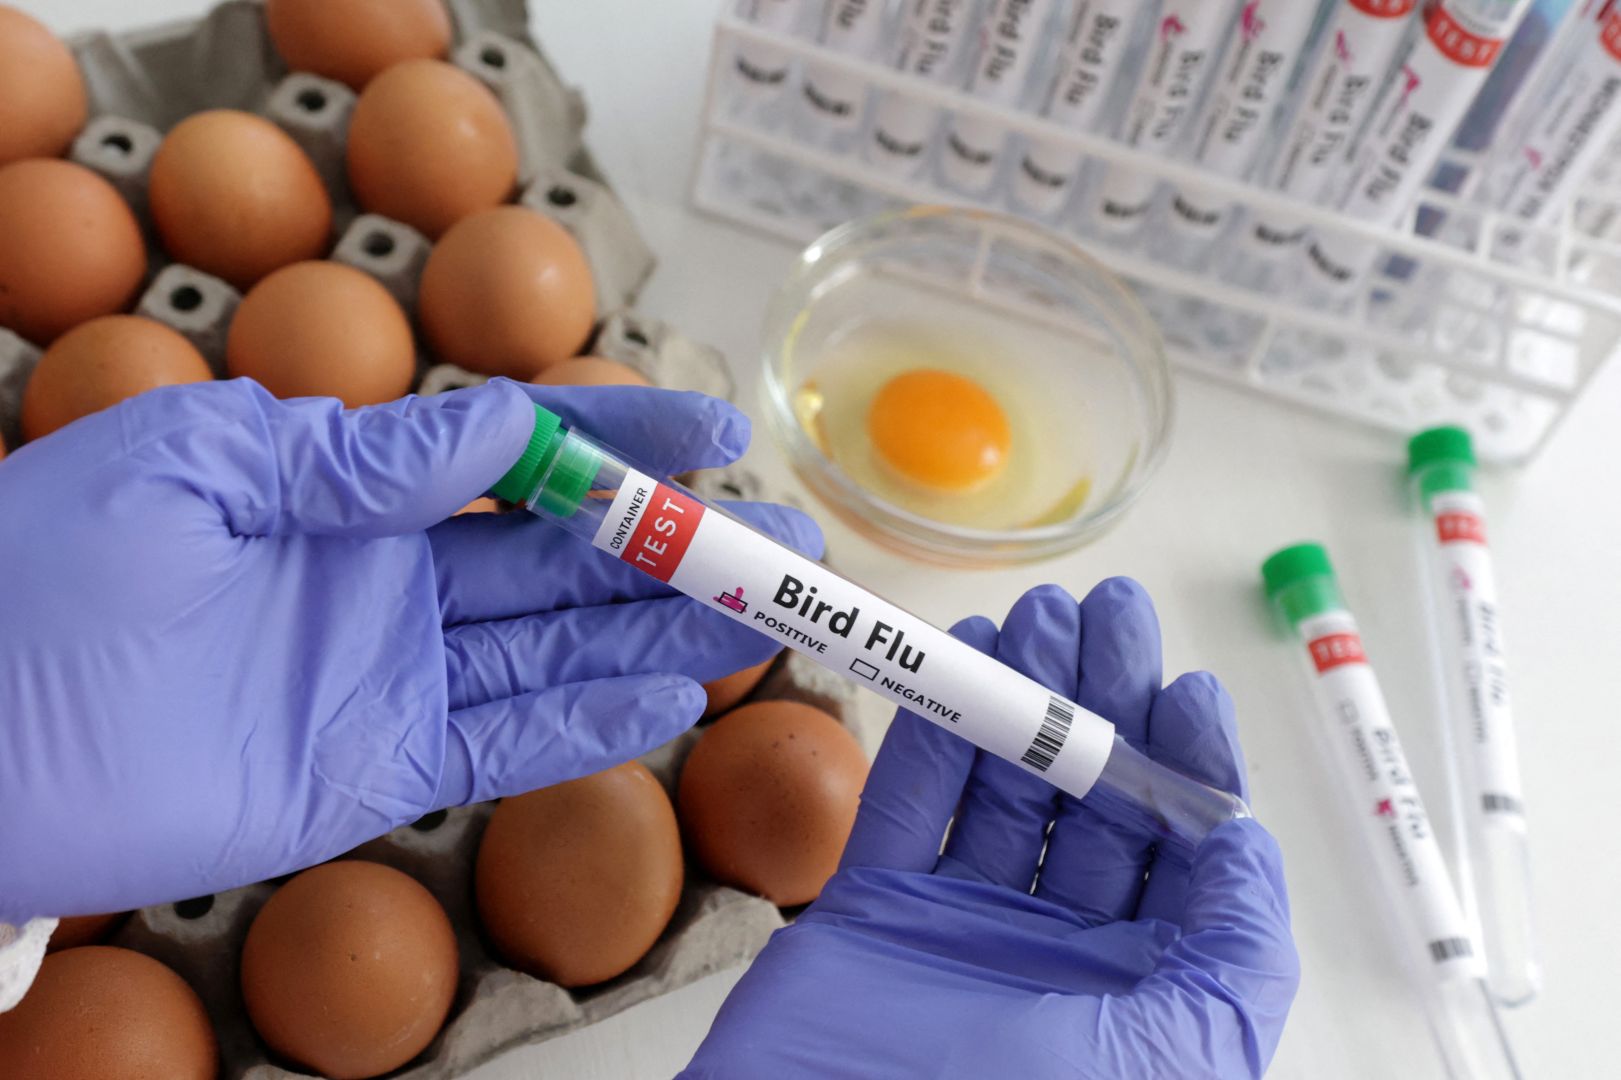 Chickens and cattle hit with massive bird flu outbreak - Will food prices go up?